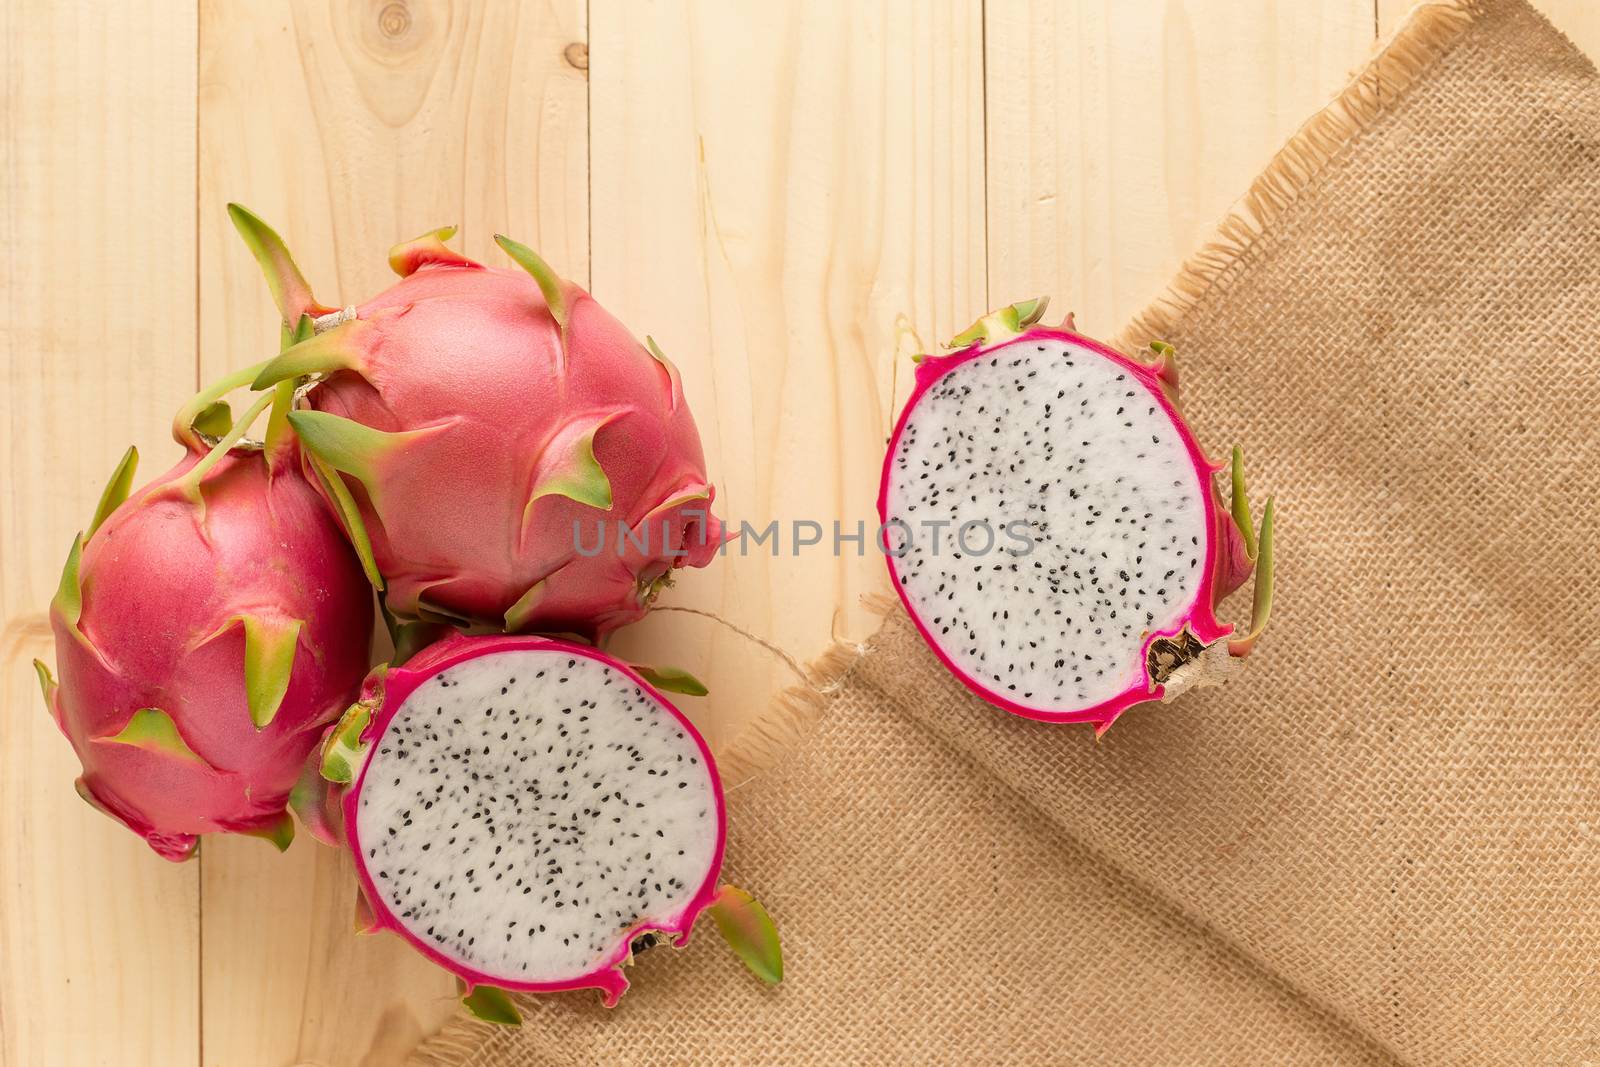 Tropical dragon fruit on wooden background. Top view.